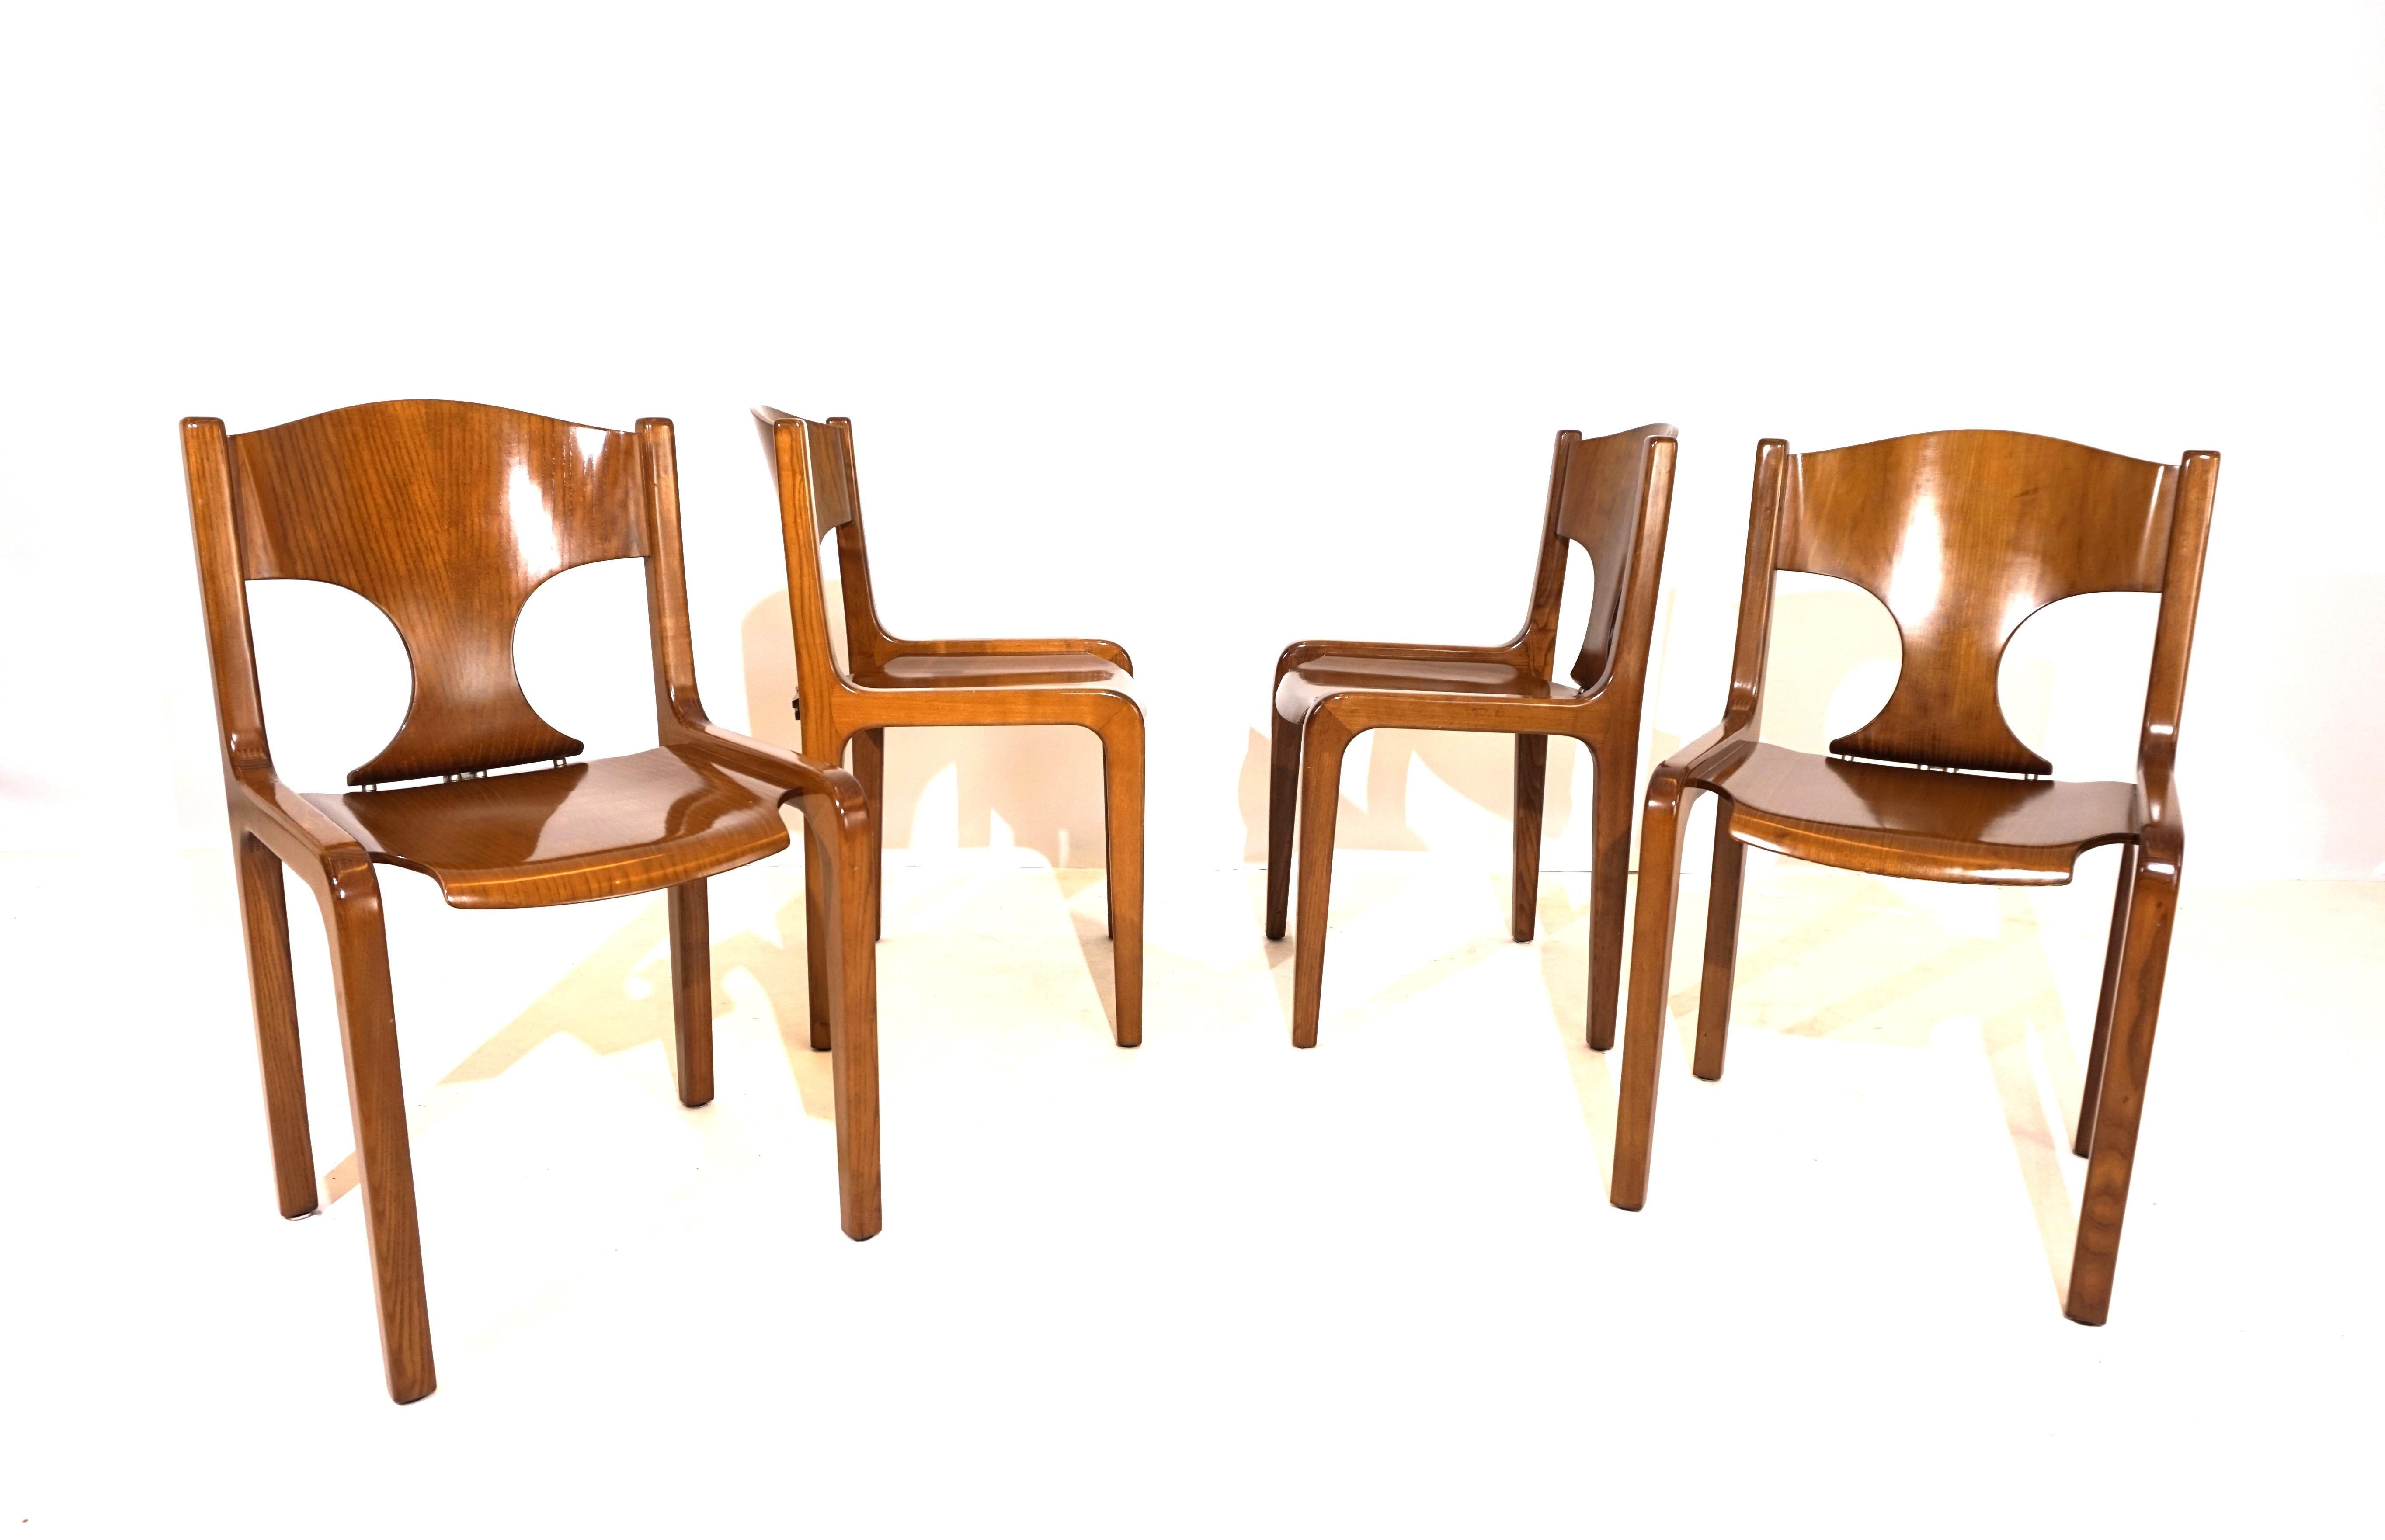 Pozzi dining chairs set of 4 by Augusto Savini In Good Condition For Sale In Ludwigslust, DE